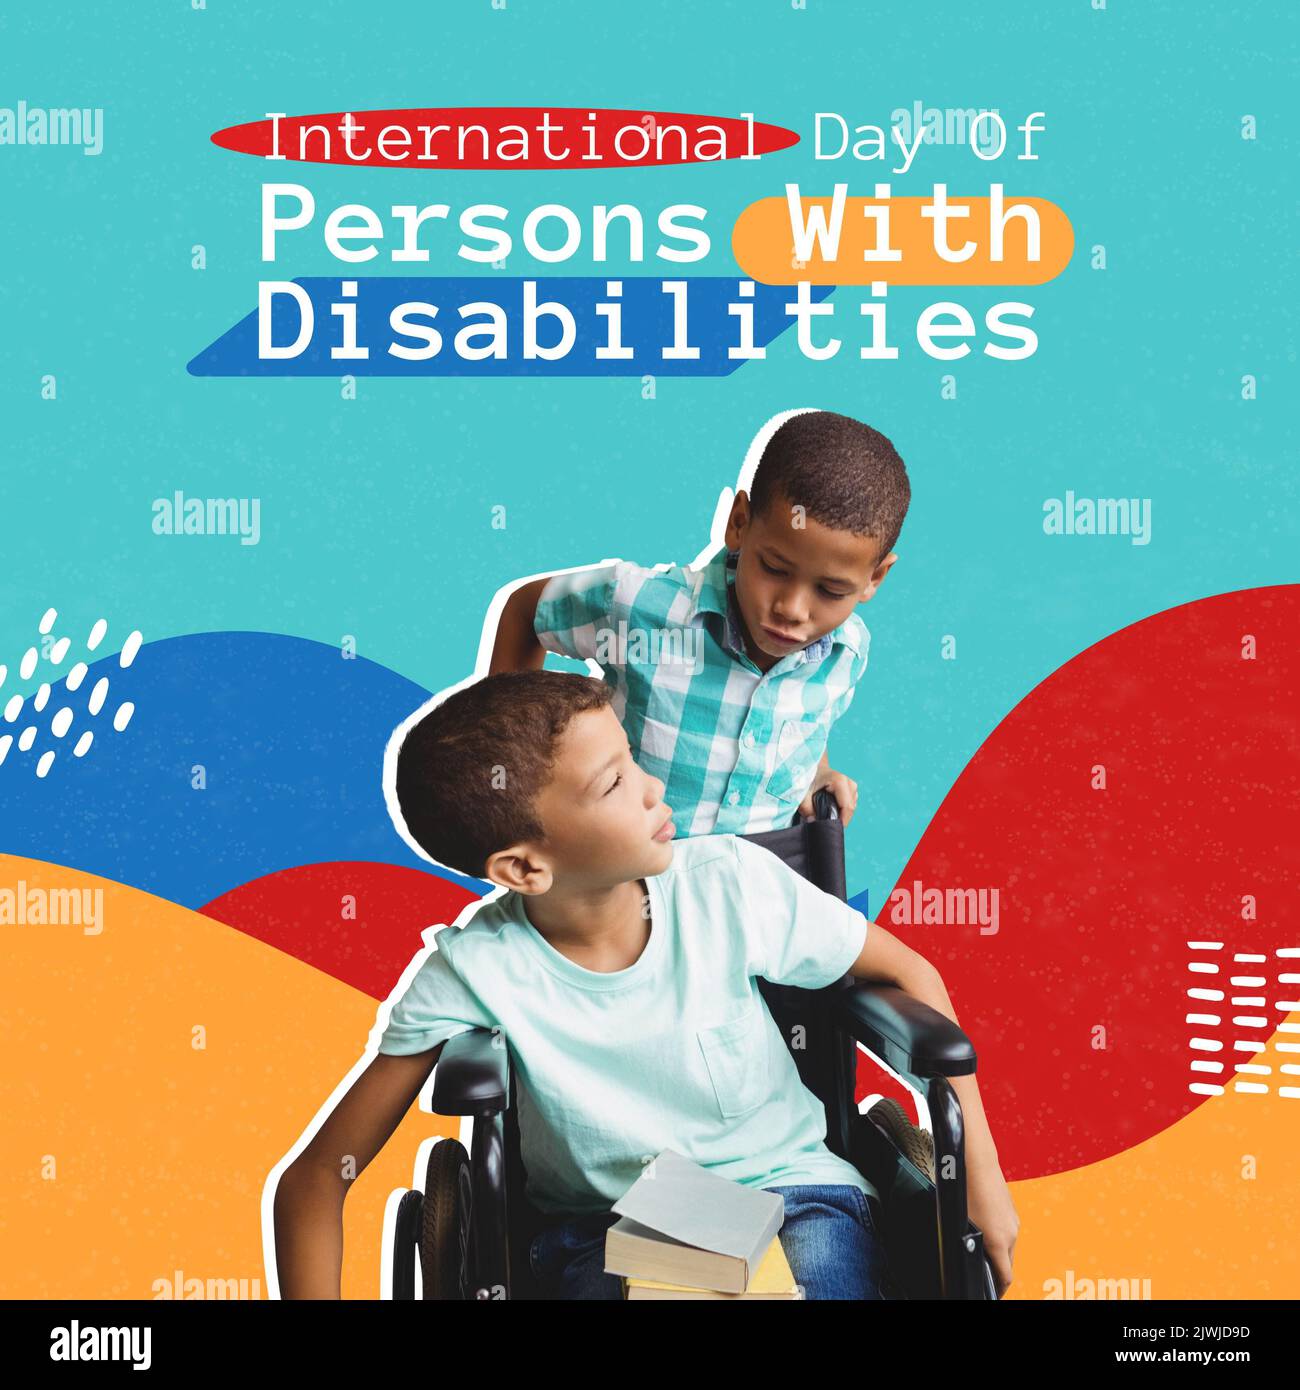 International day of persons with disabilities text, boy talking with friend sitting on wheelchair Stock Photo